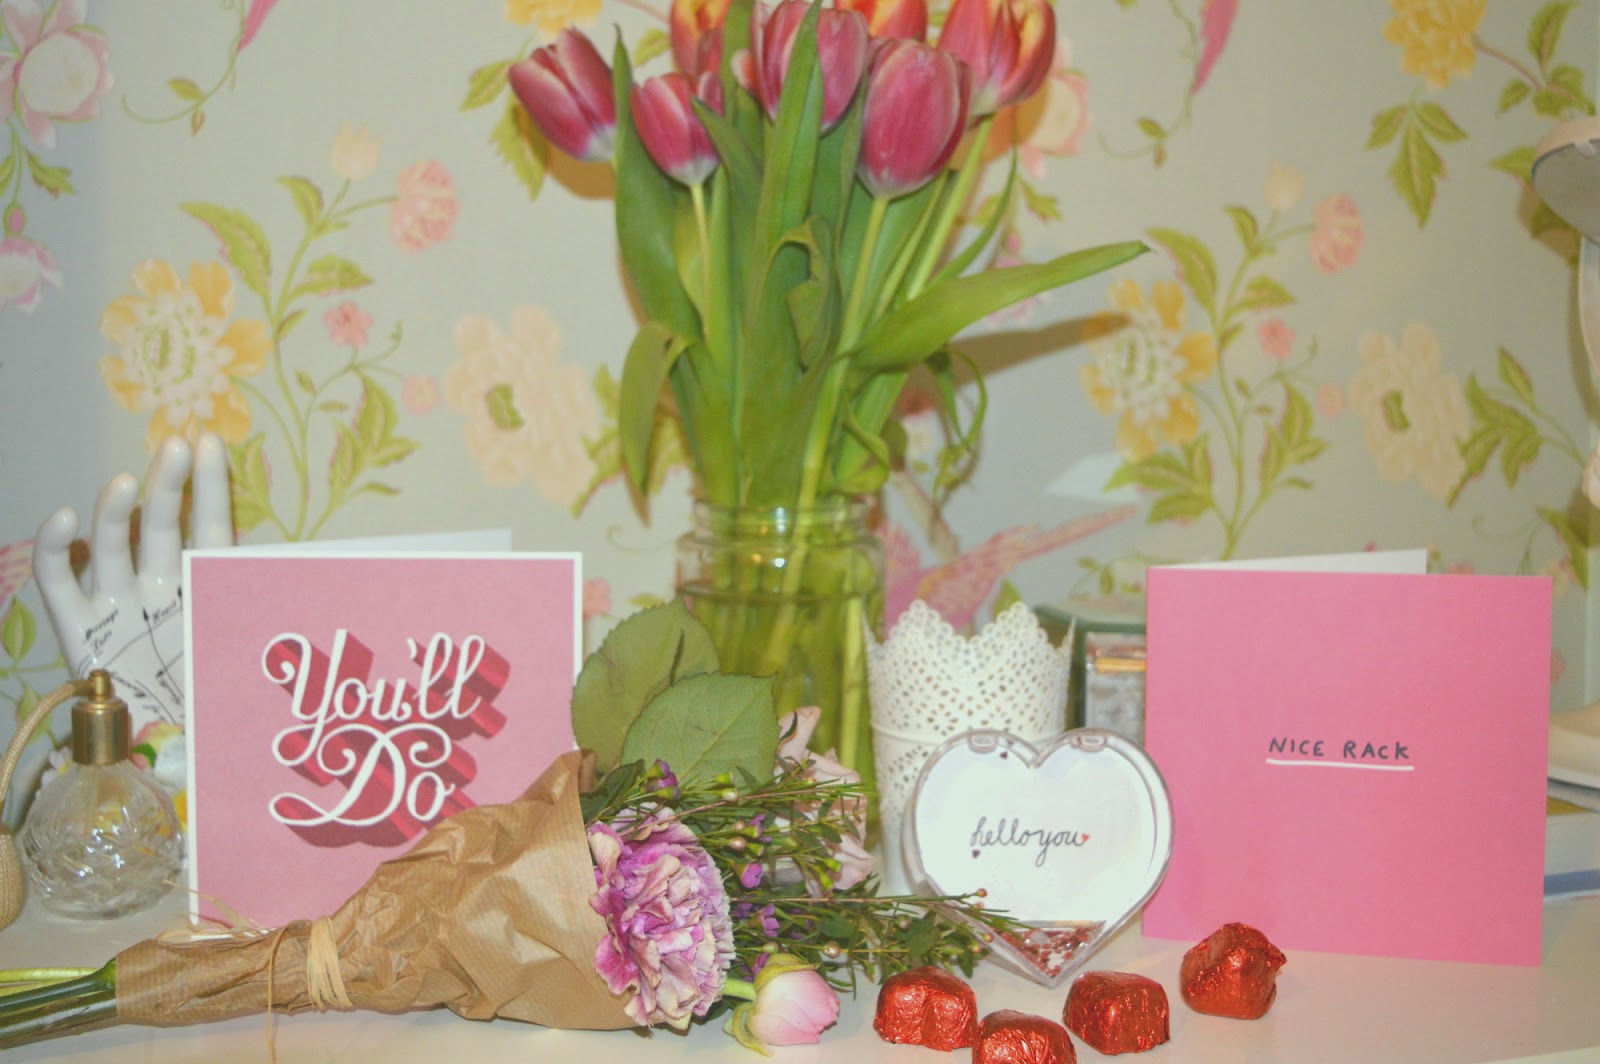 Lifestyle Review: Valentine's Day 2016 Photo Diary